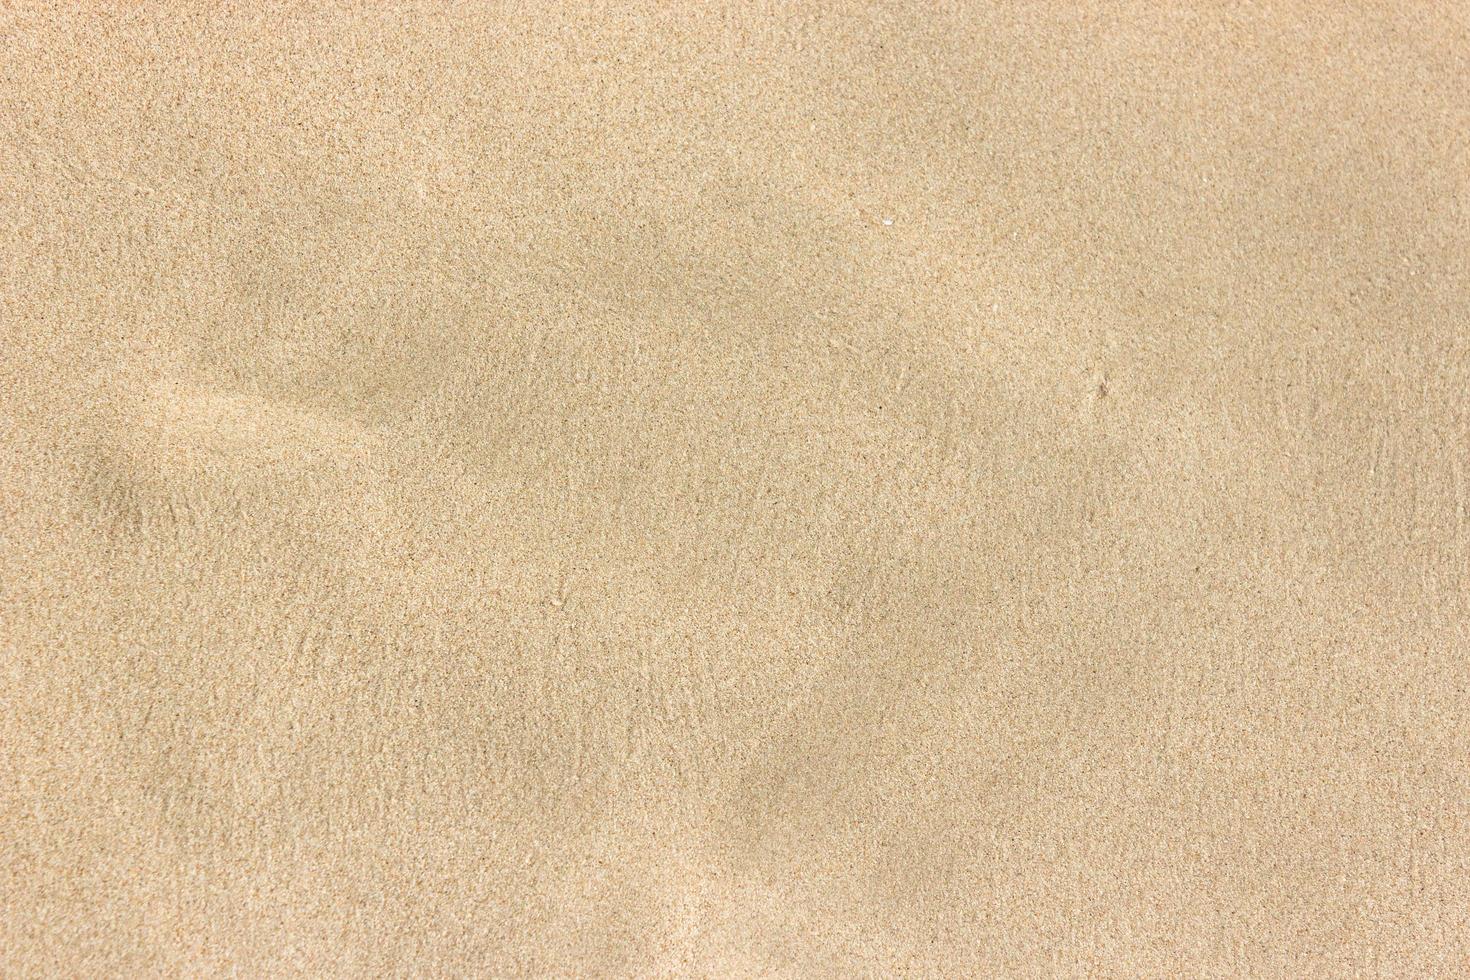 Sand and beach for texture and background photo